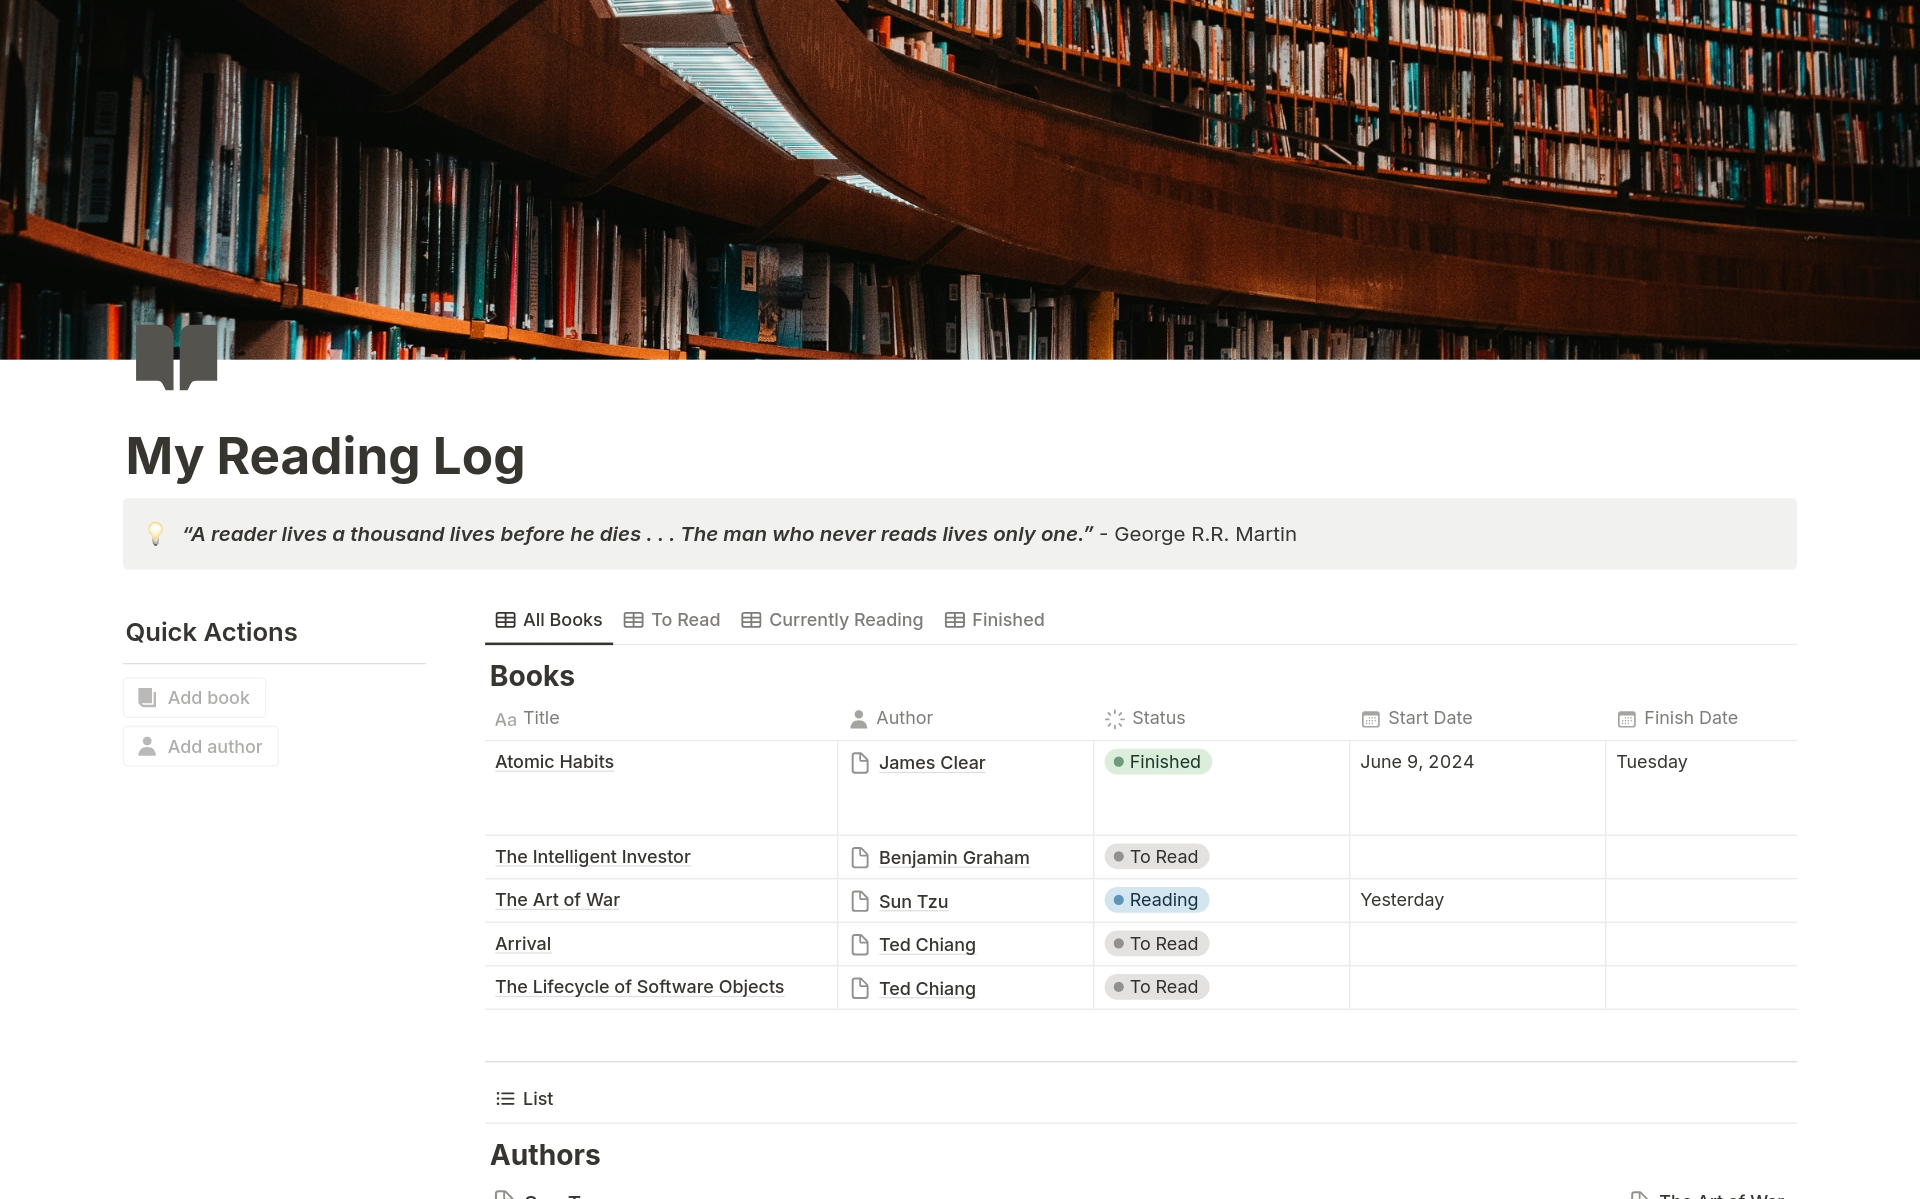 The My Reading Log template helps you track your reading journey by listing books you plan to read, are currently reading, and have finished. Update book status, record dates, rate each book, and jot down notes and favorite quotes.